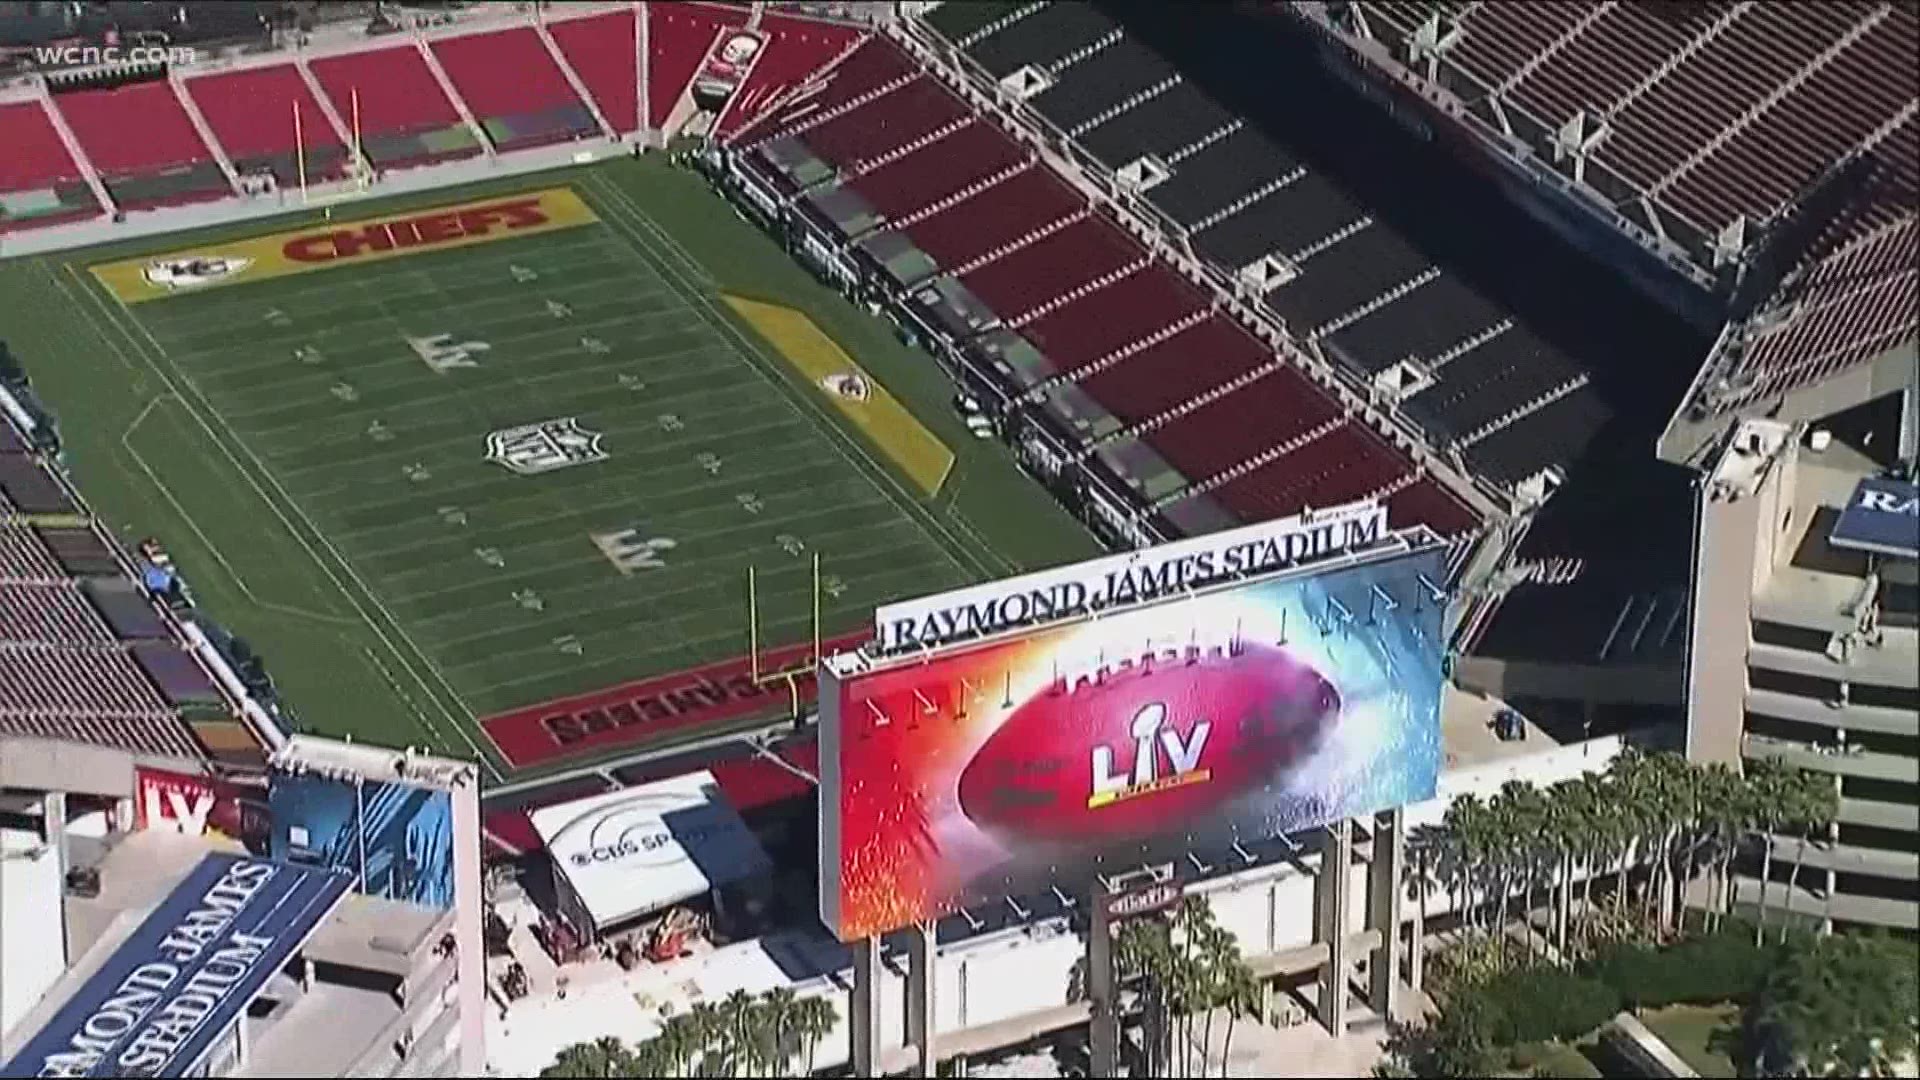 The group of 10 reunites every year to watch the Super Bowl together. This year, they'll be watching it  at Raymond James Stadium in Tampa Bay.